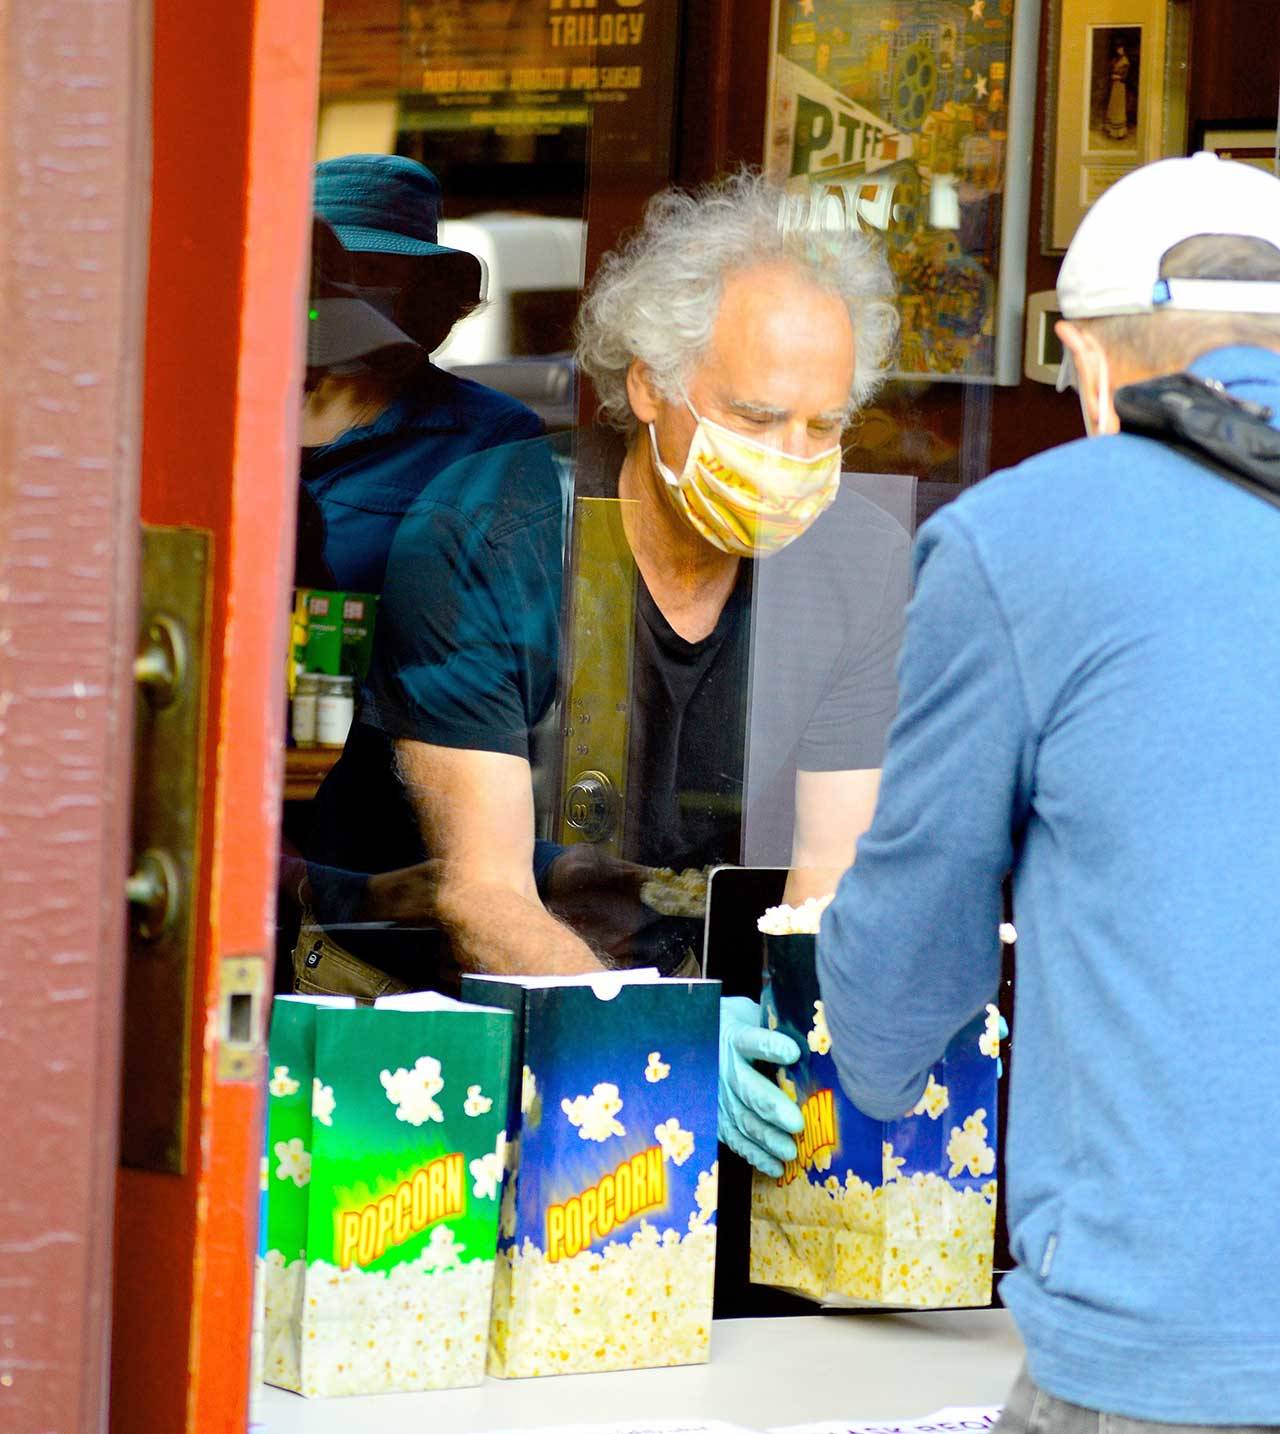 Rose Theatre owner Rocky Friedman becomes a popcorn vendor Saturday afternoons at his theater on Port Townsend’s Taylor Street. (Diane Urbani de la Paz/for Peninsula Daily News)